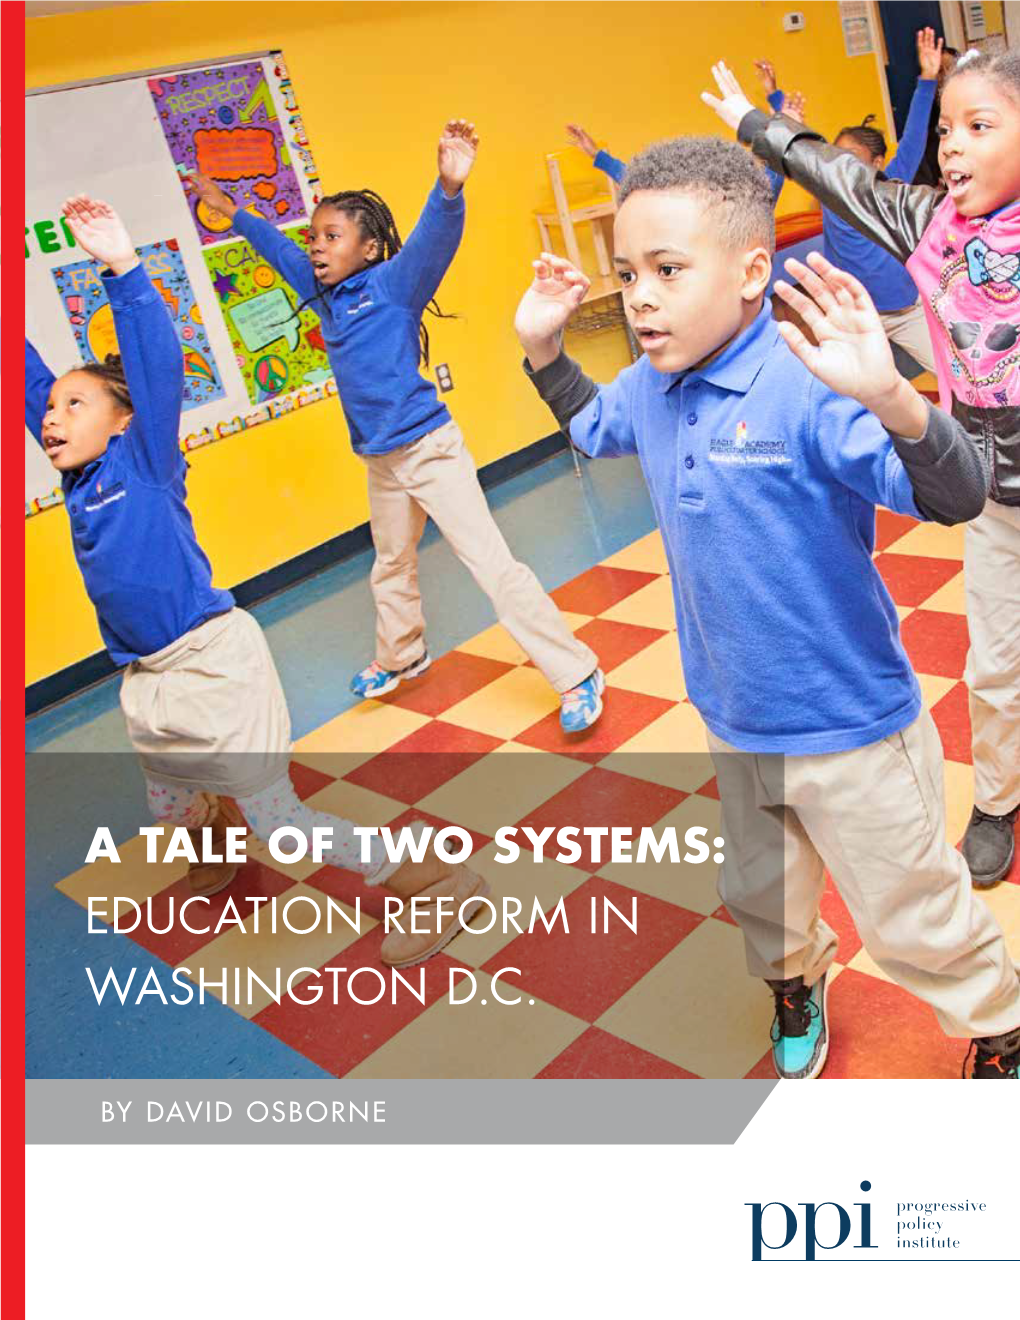 A Tale of Two Systems: Education Reform in Washington D.C